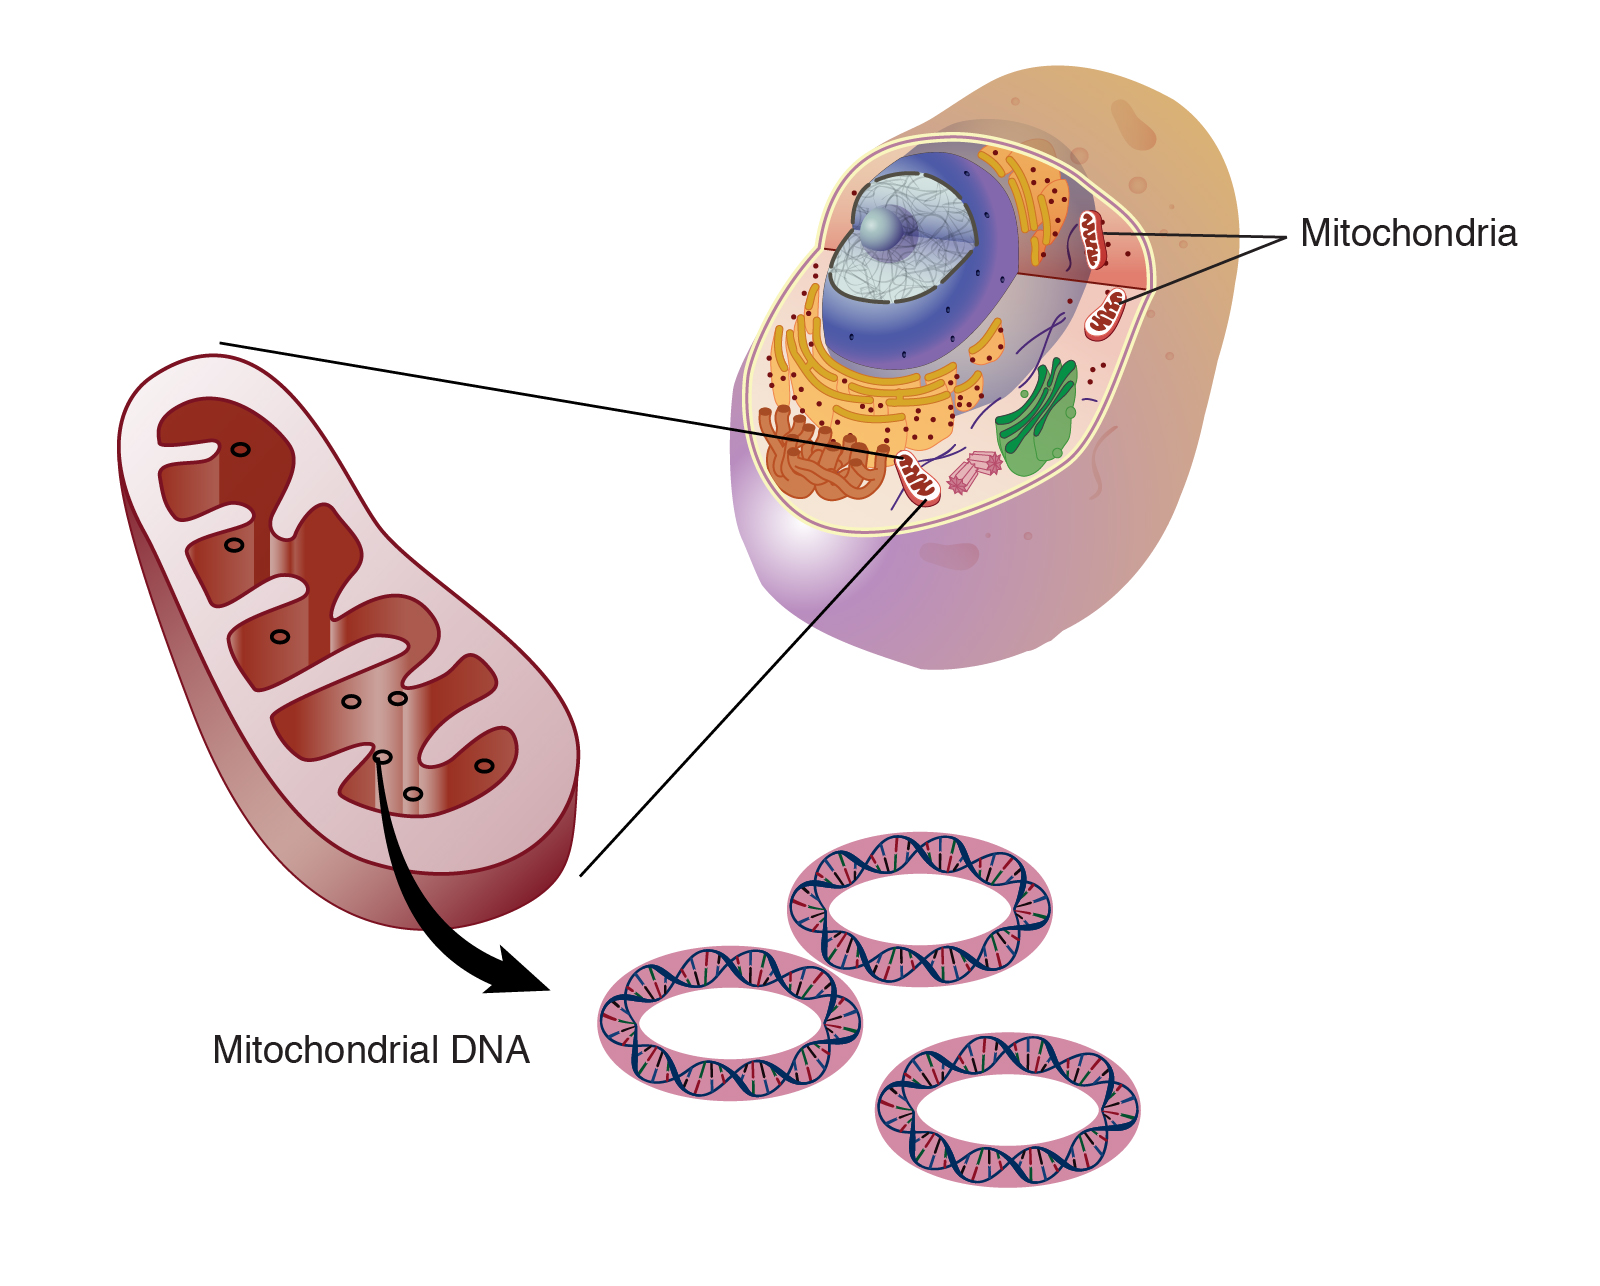 Image of a cell, mitochondria within a cell, and mitochondria DNA